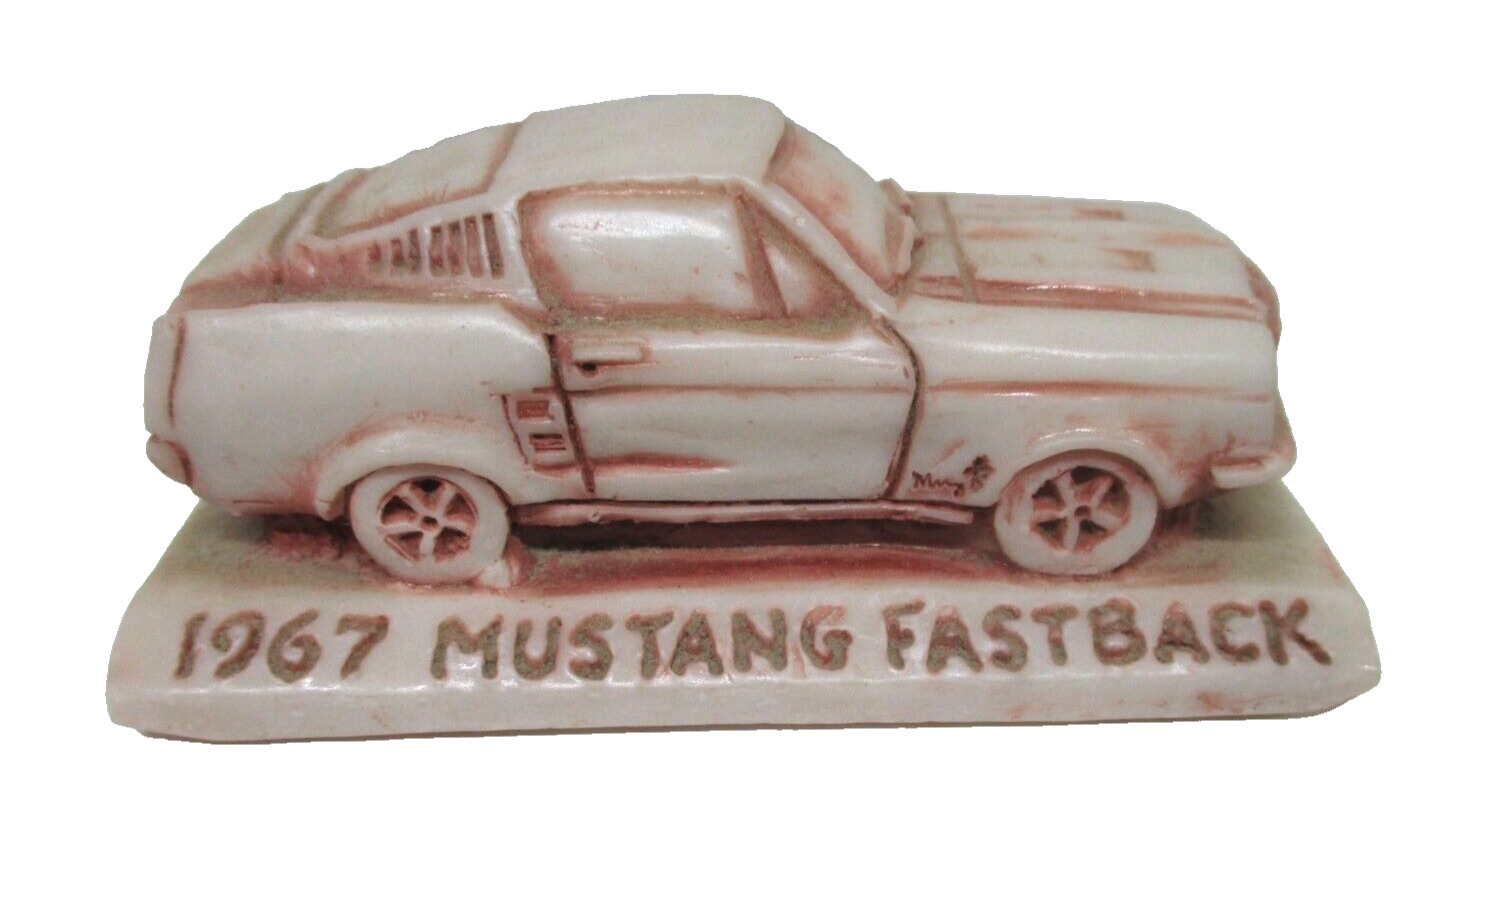 1967 Mustang Fastback numbered limited edition Georgia Marble Ford collectible